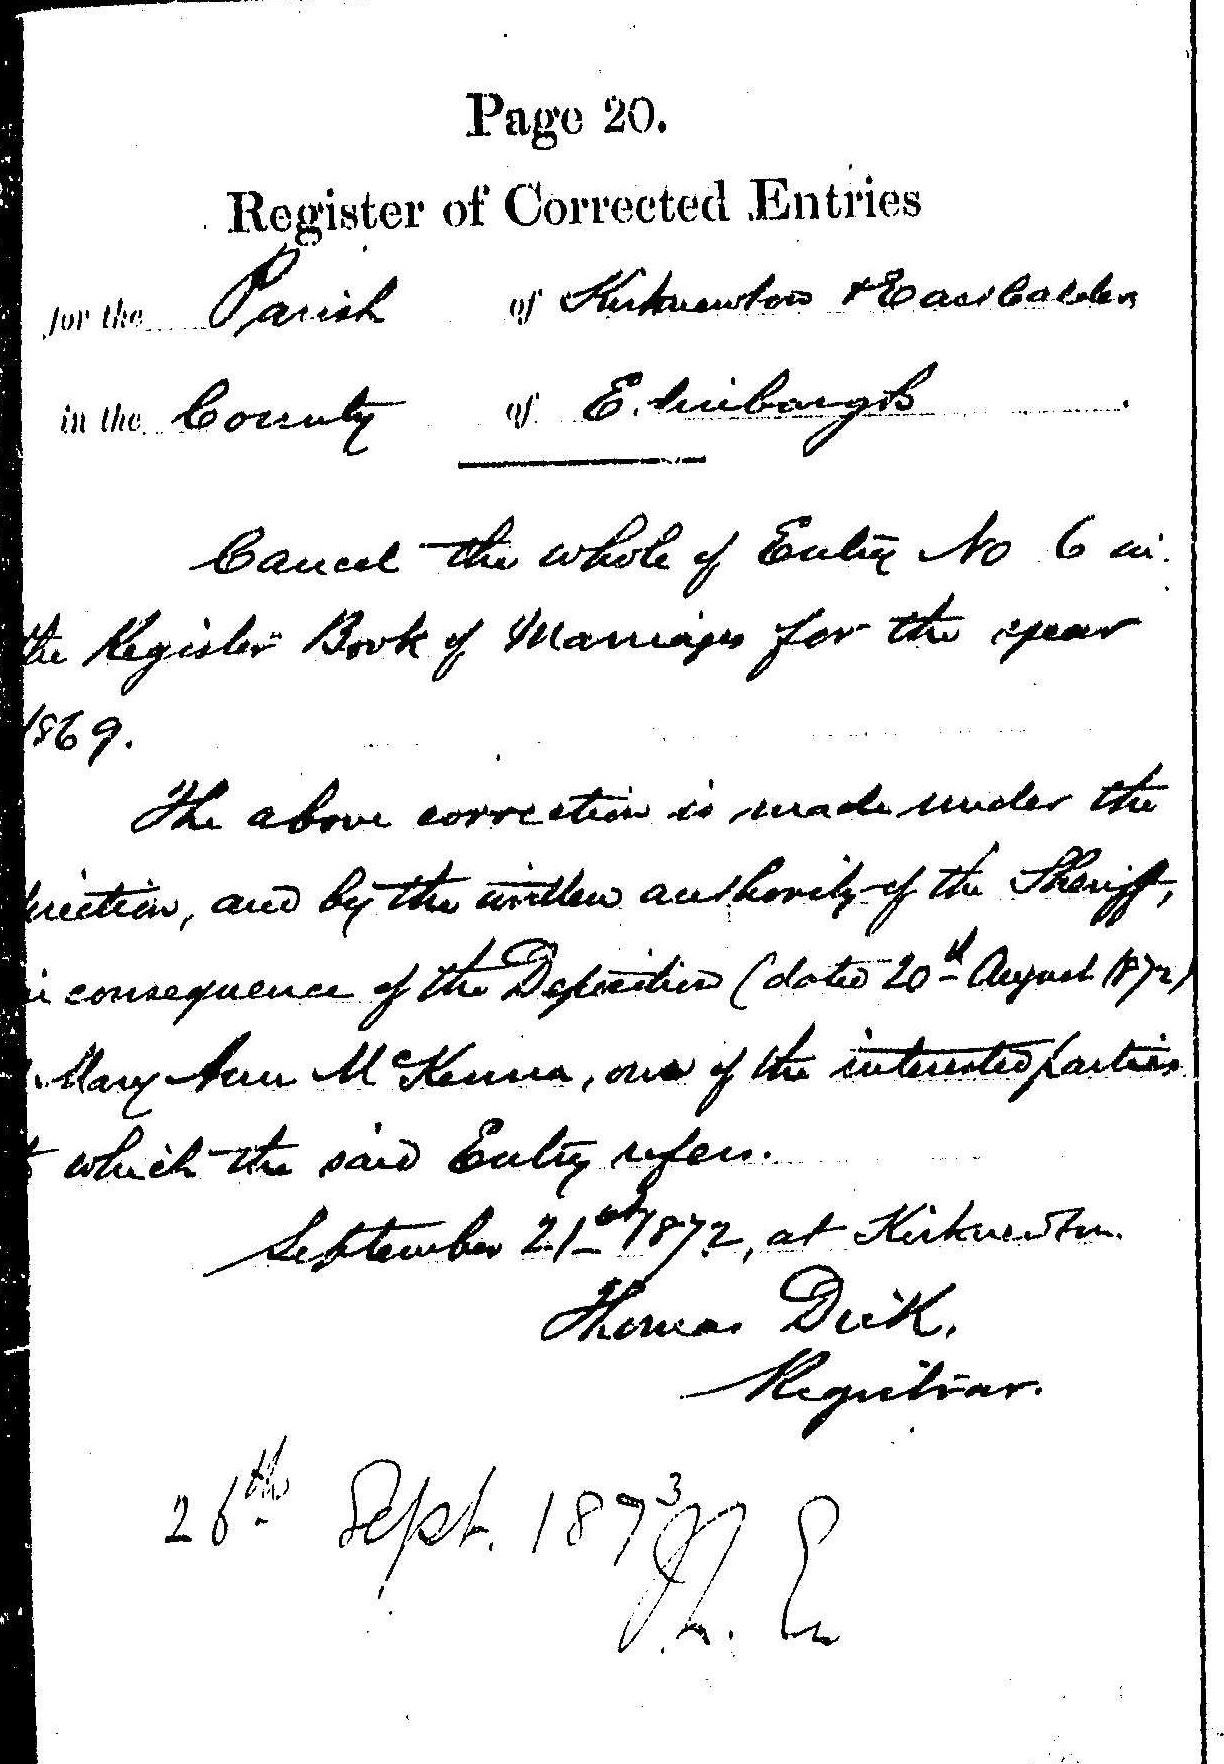 Register of Corrected Entries instructs that the whole marriage entry for John Campbell and Mary Ann McKenna in 1869 be cancelled.